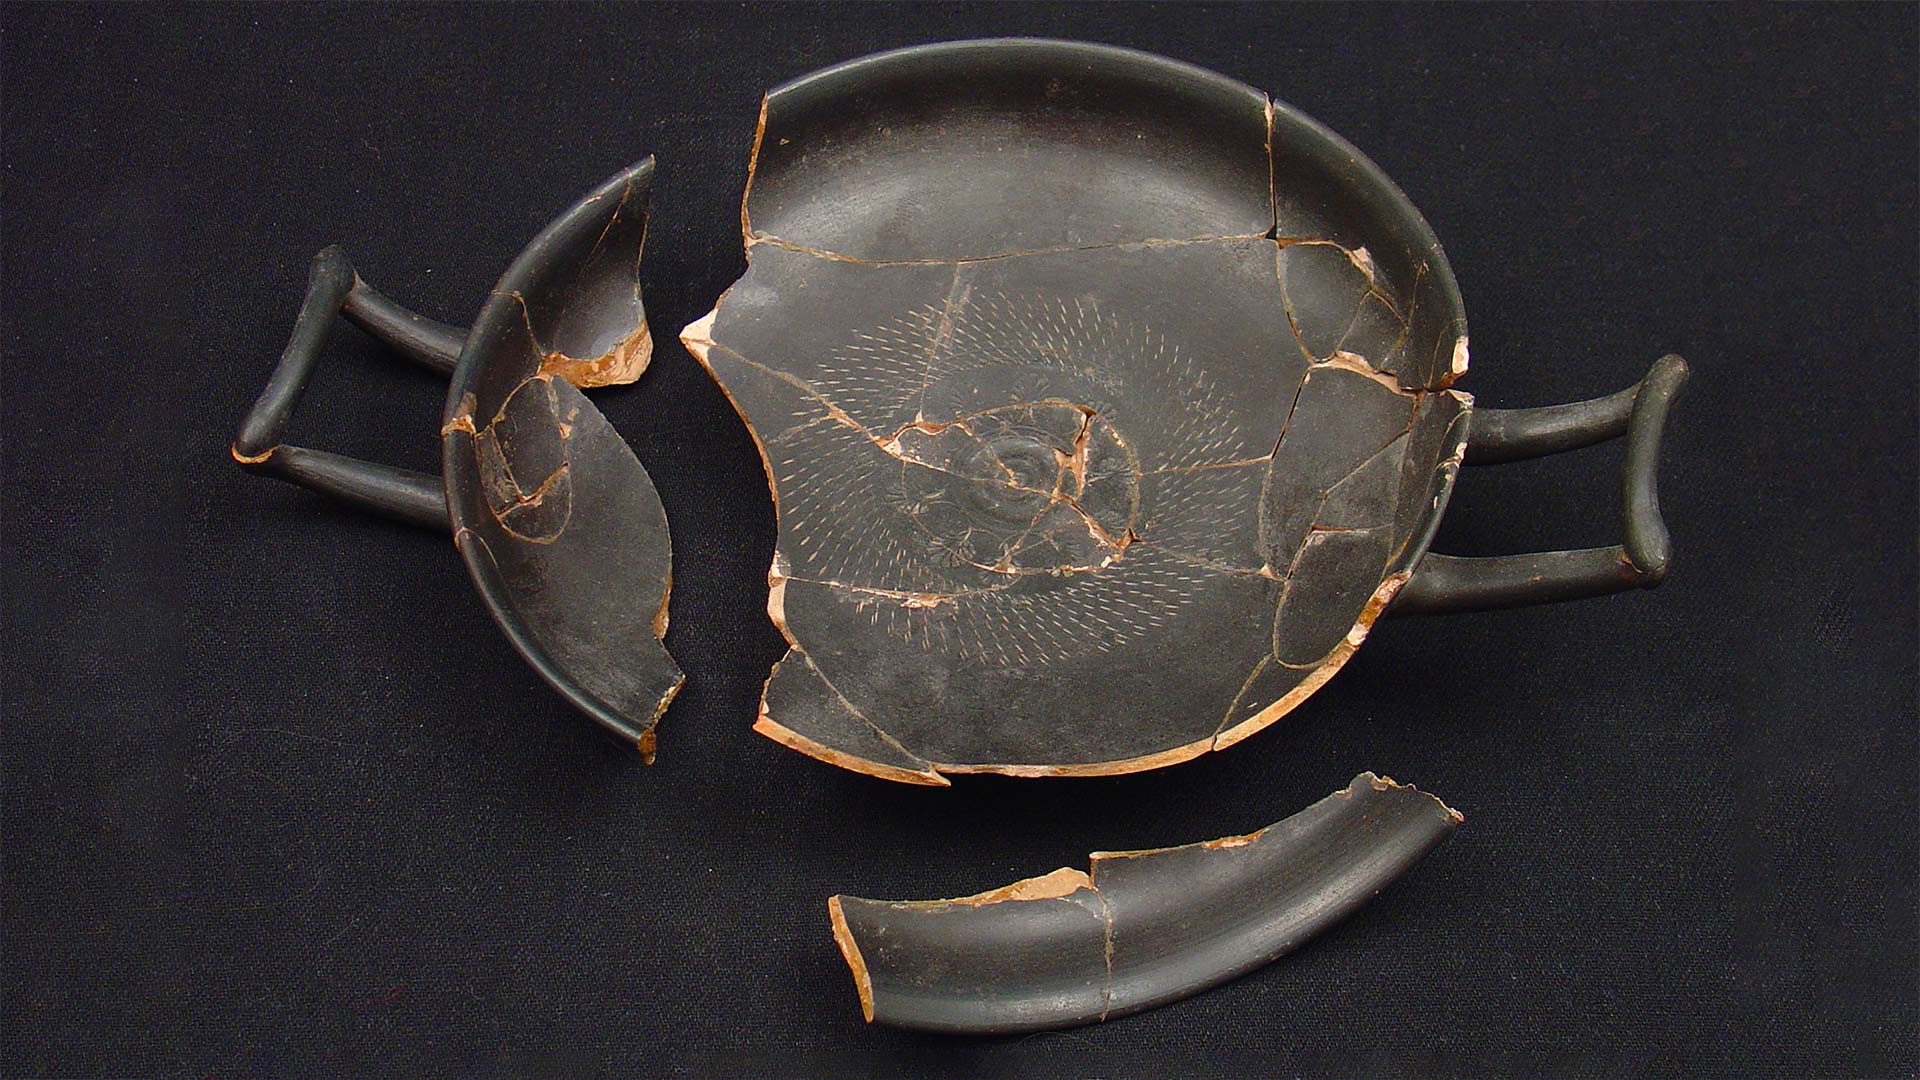 A fragmented black and gold shallow drinking cup from the Hellenistic Italian period.